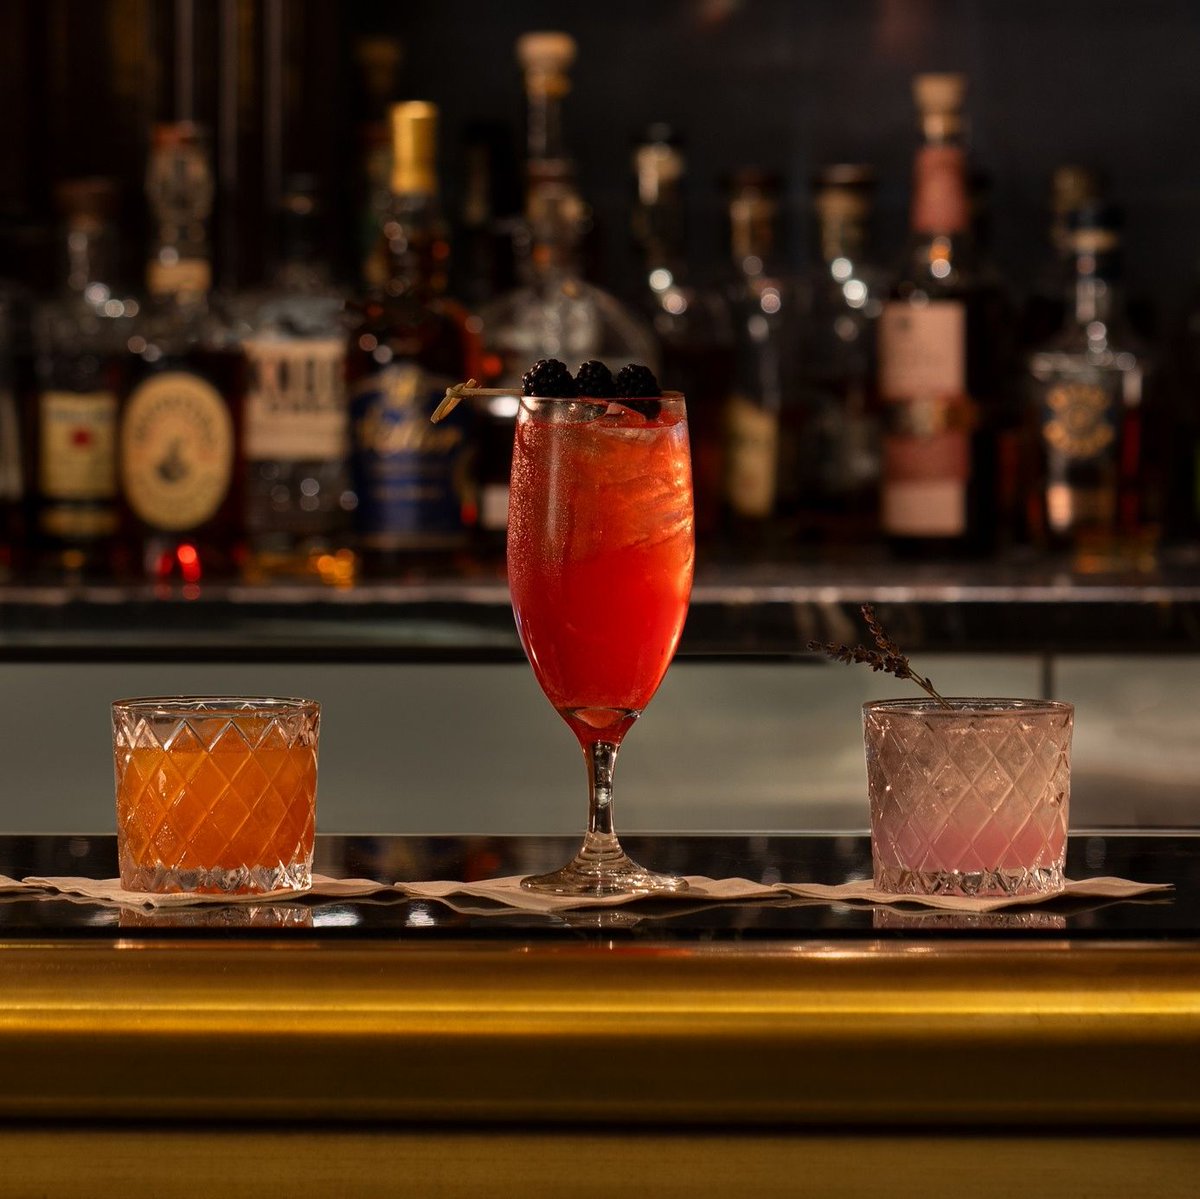 Participating in #DryJanuary? The Lobby Lounge offers a variety of mocktails that will elevate your evening.